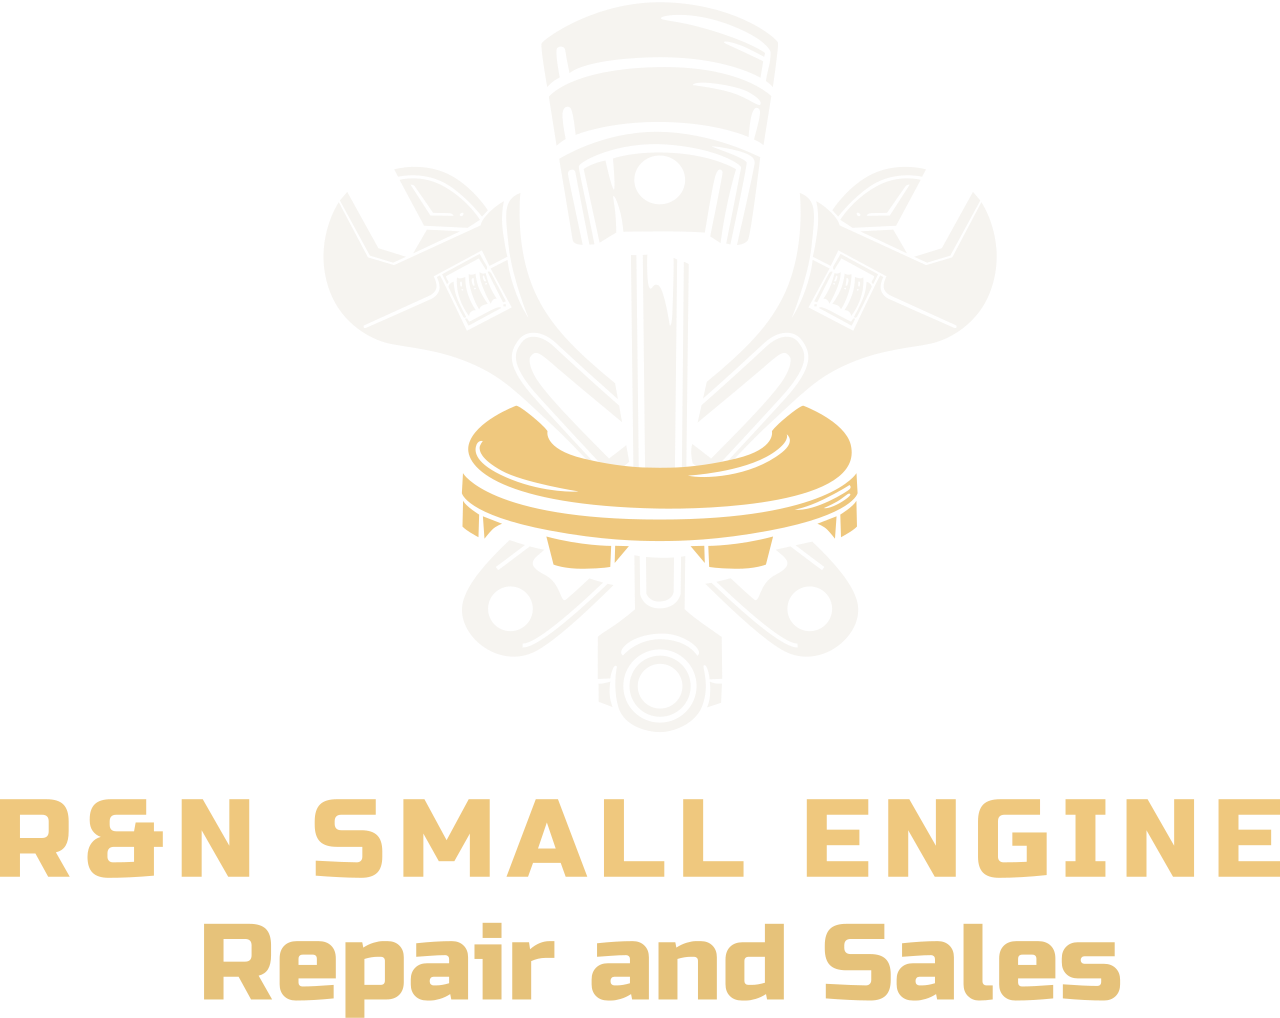 R&N Small Engine Repair and Sales 's logo